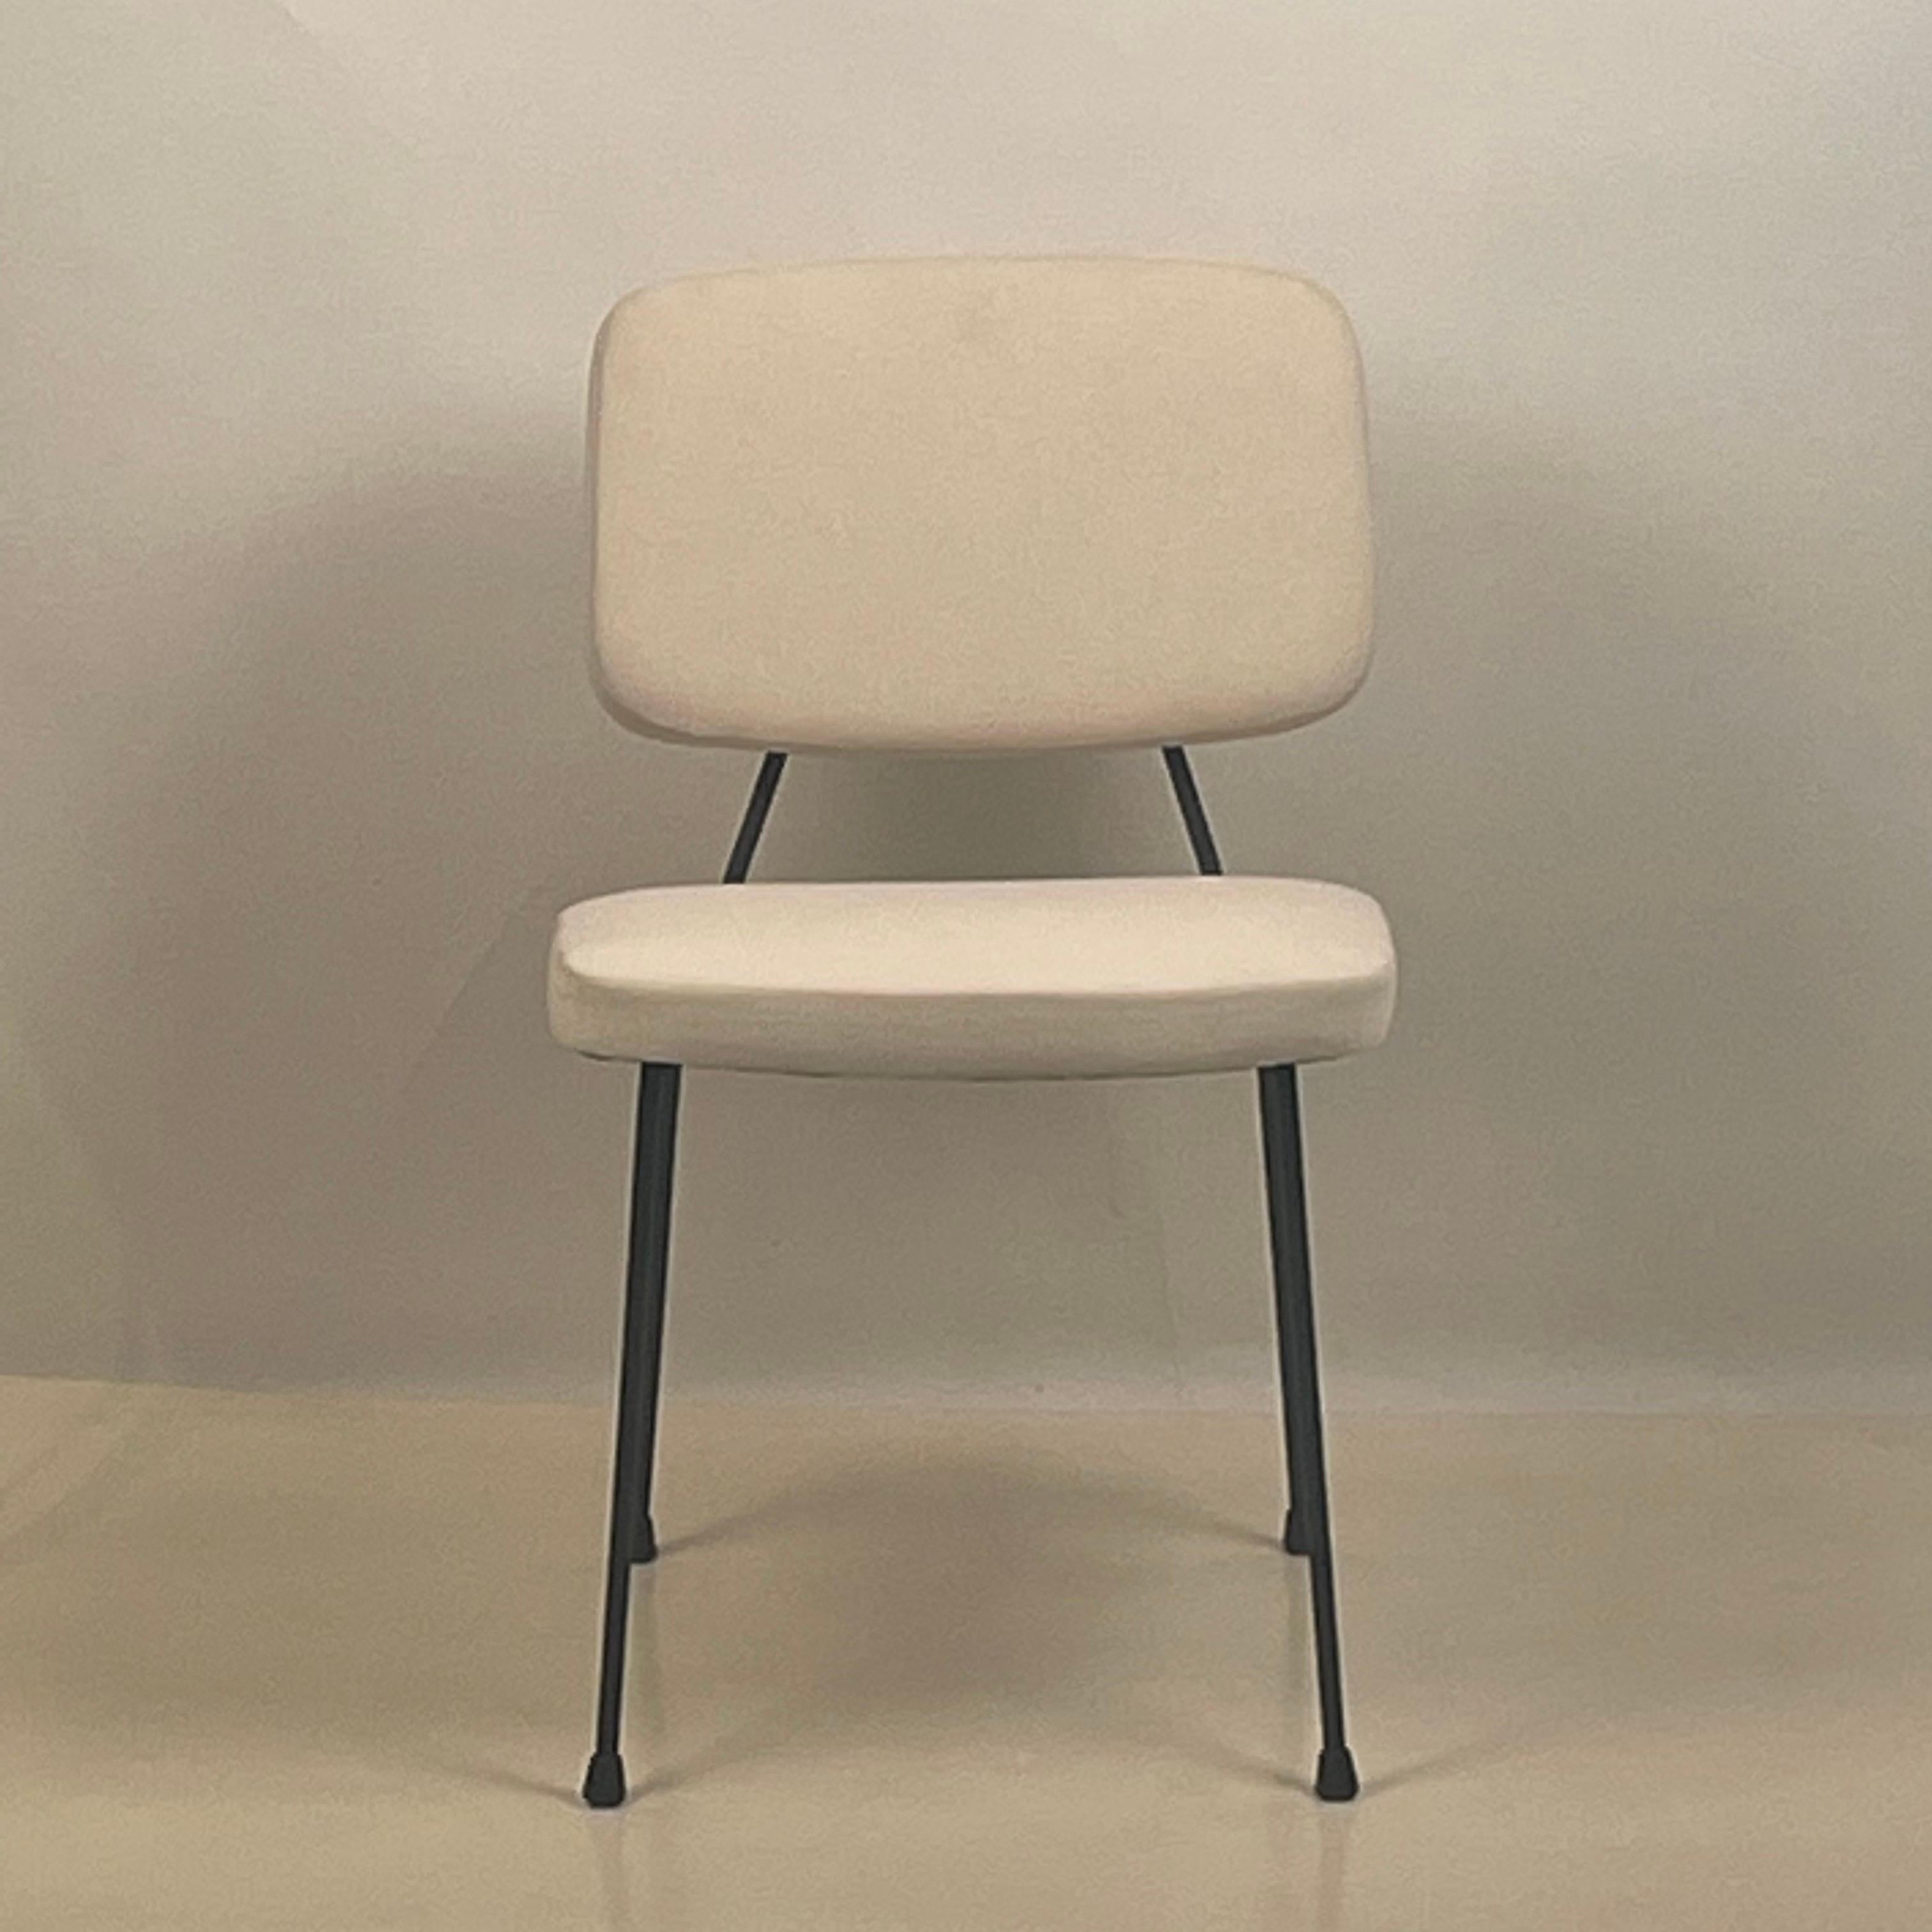 Introducing the 'Décade' chair by Design Frères, the perfect blend of French 60's style and contemporary comfort. Crafted with meticulous attention to detail, this chair features a hand-welded steel frame, for both durability and slender elegance.